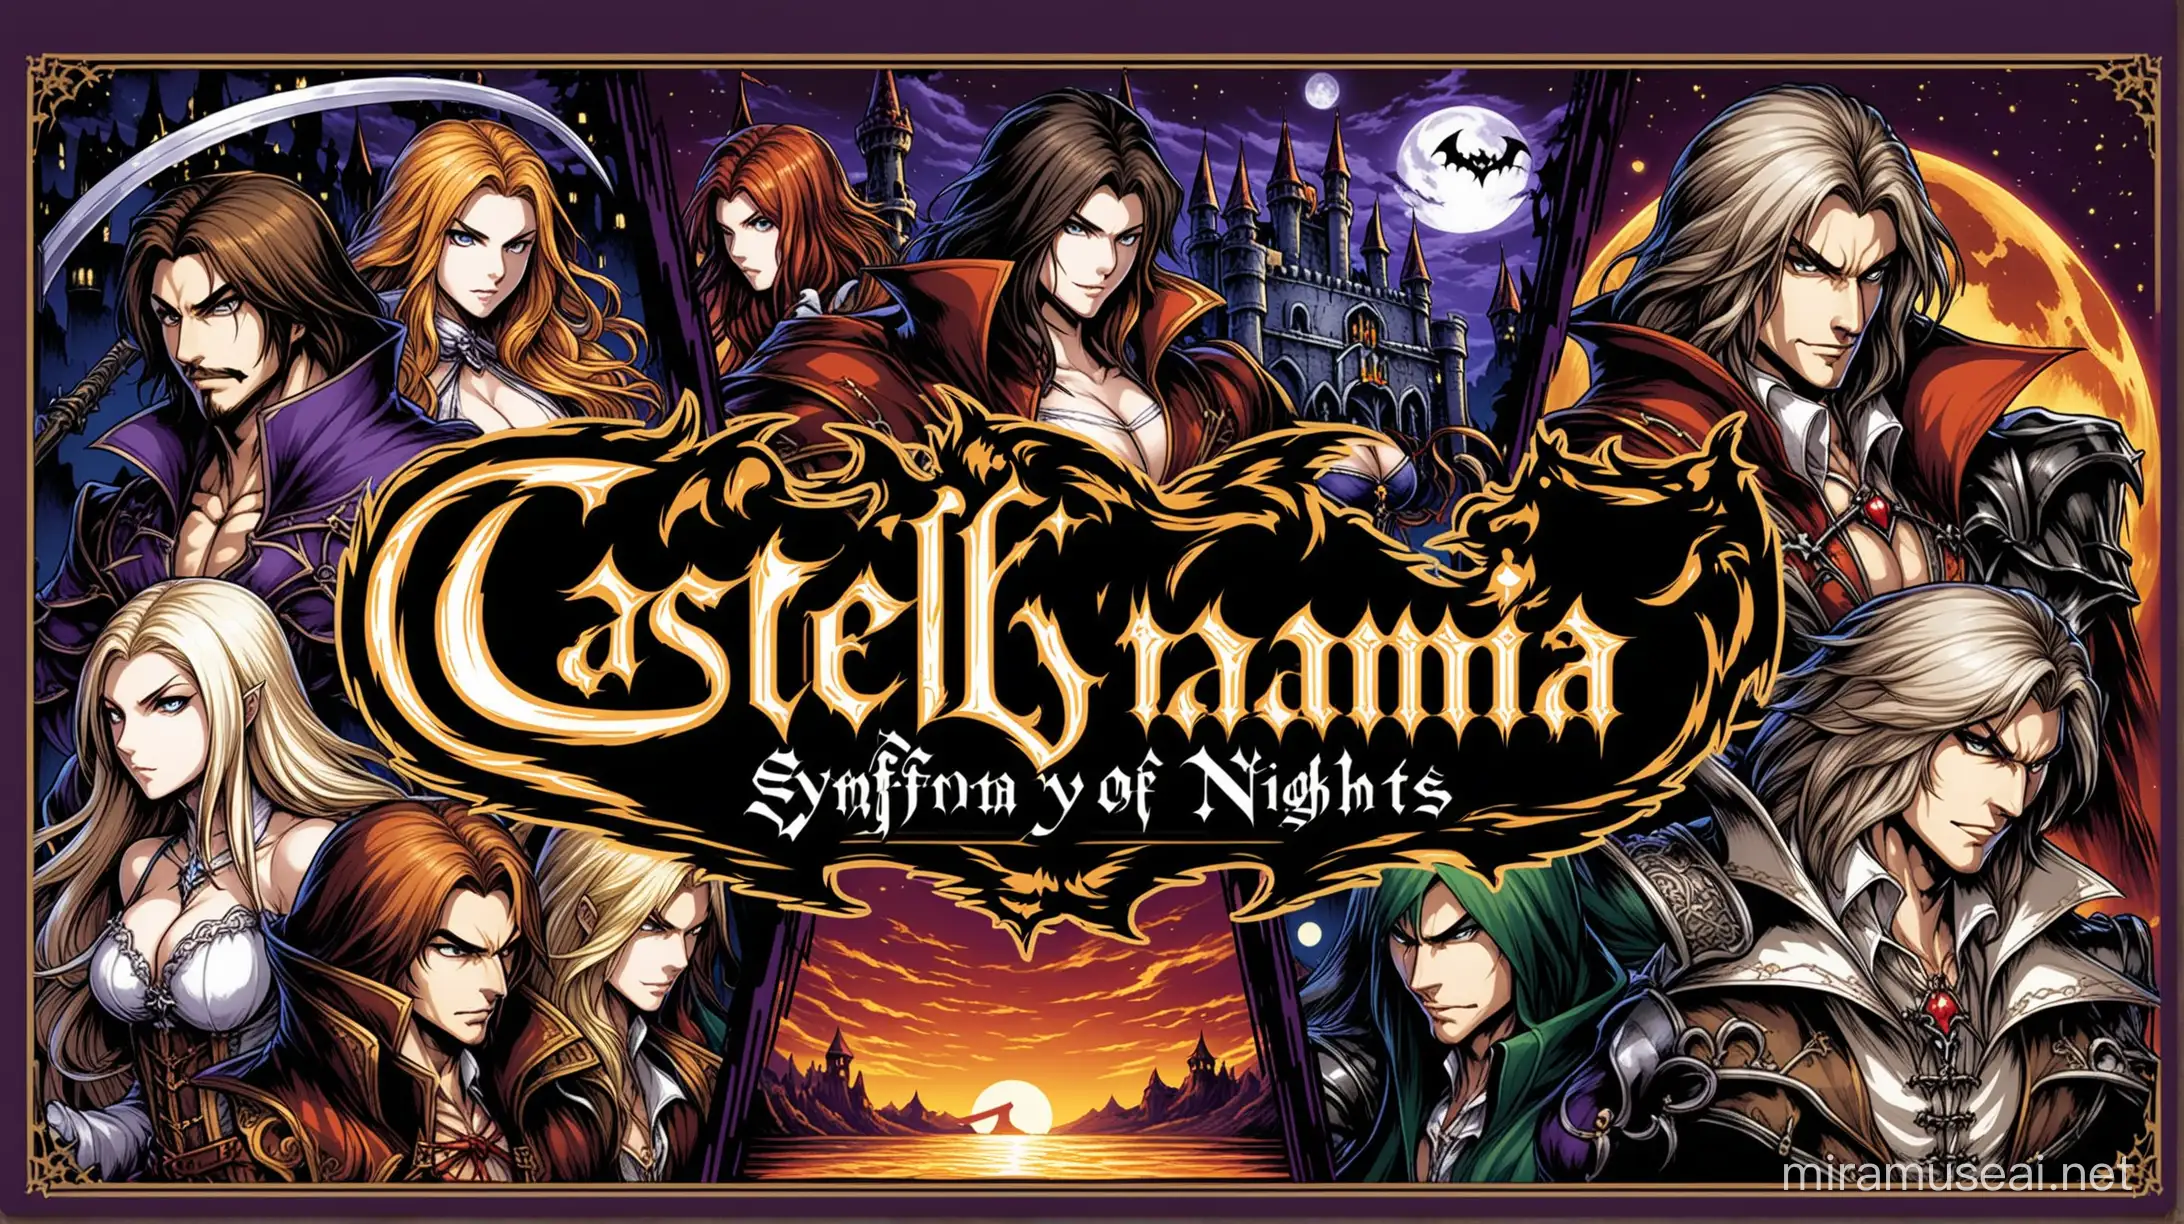 Castlevania Symphony of the Nights Arcade Machine Art Characters Surrounding Game Title